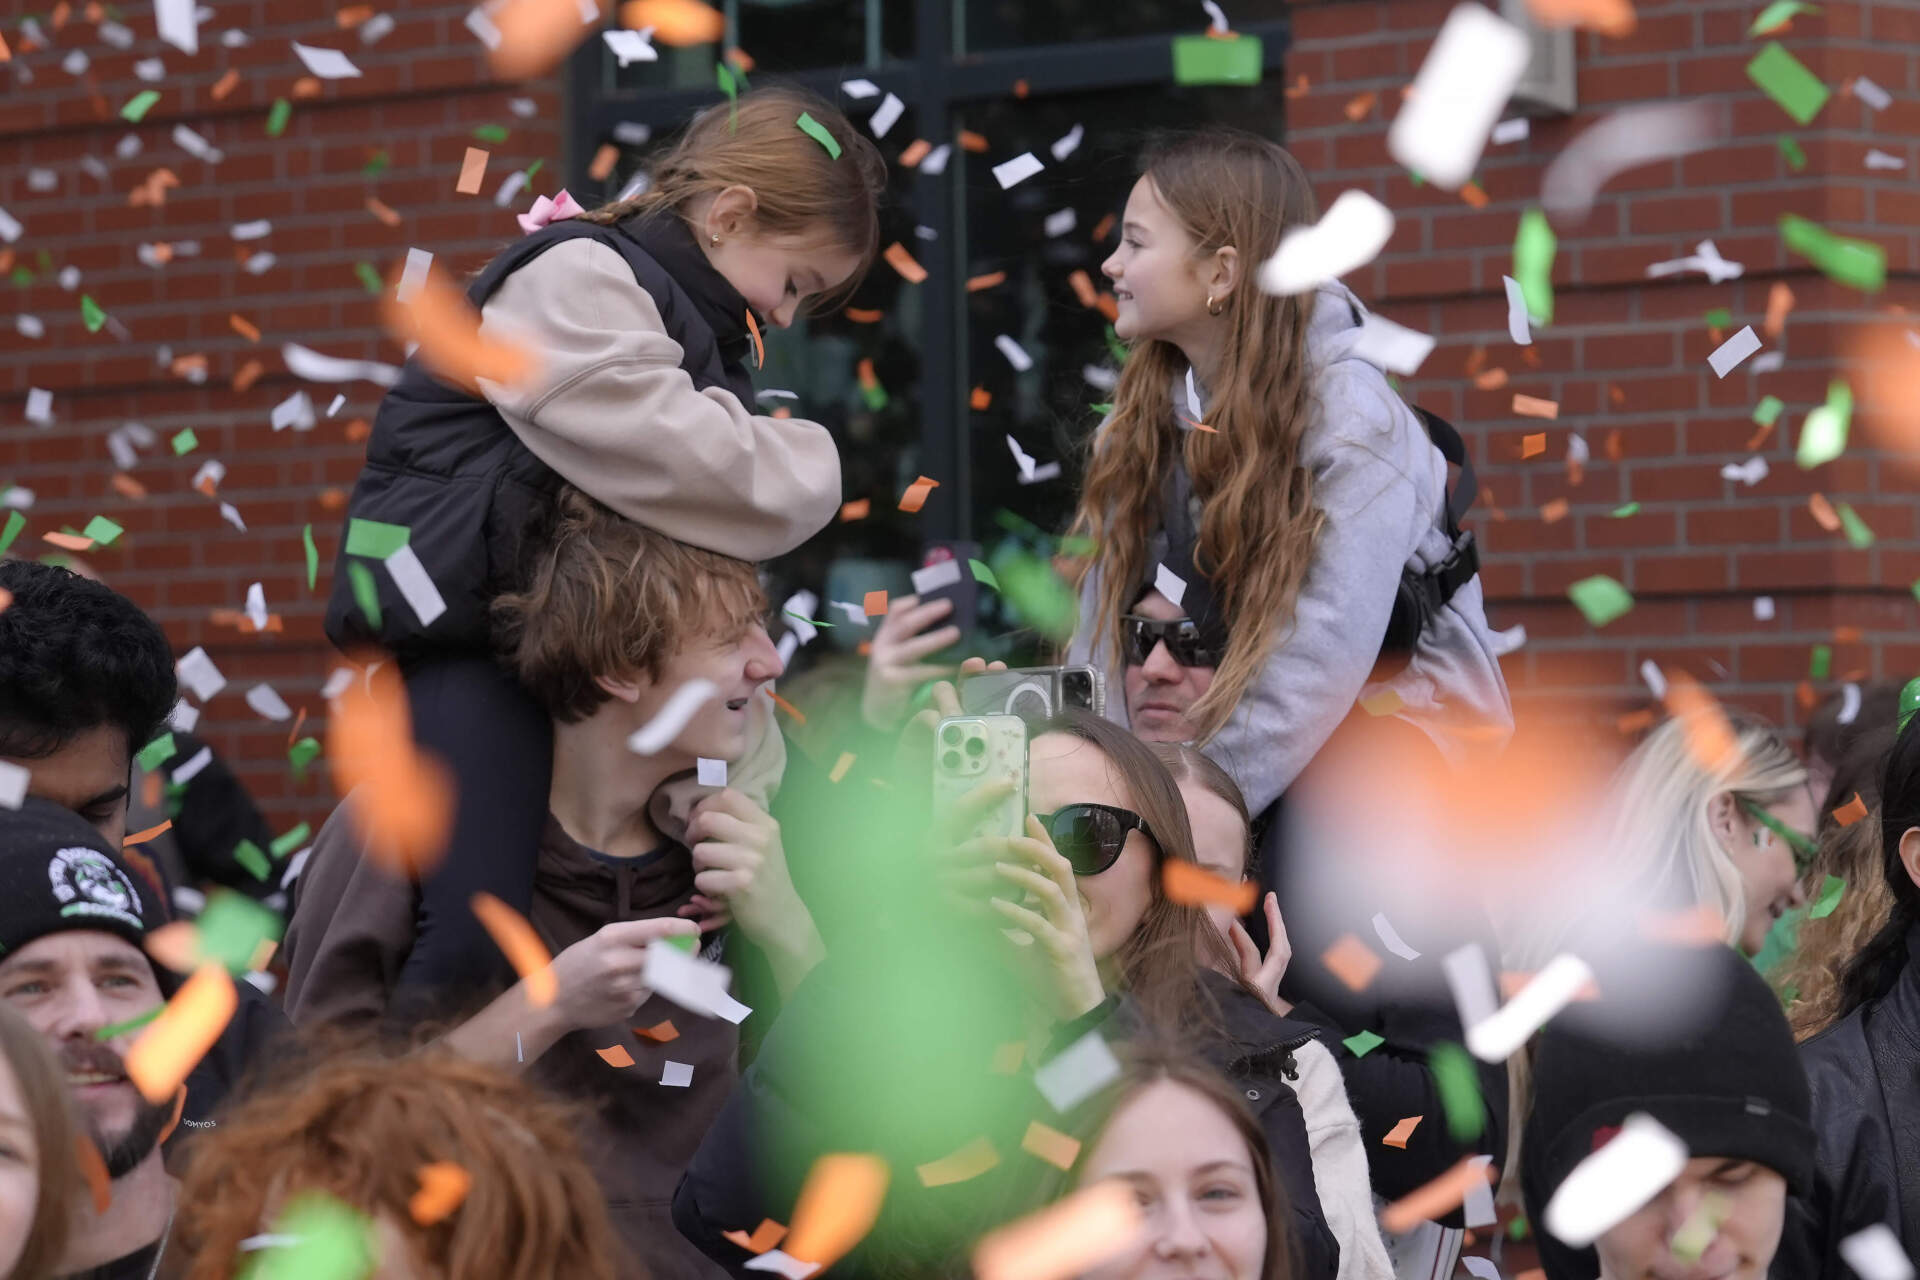 People are blanketed with falling confetti during opening ceremonies for the 2014 St. Patrick's Day parade in South Boston. (Steven Senne/AP)